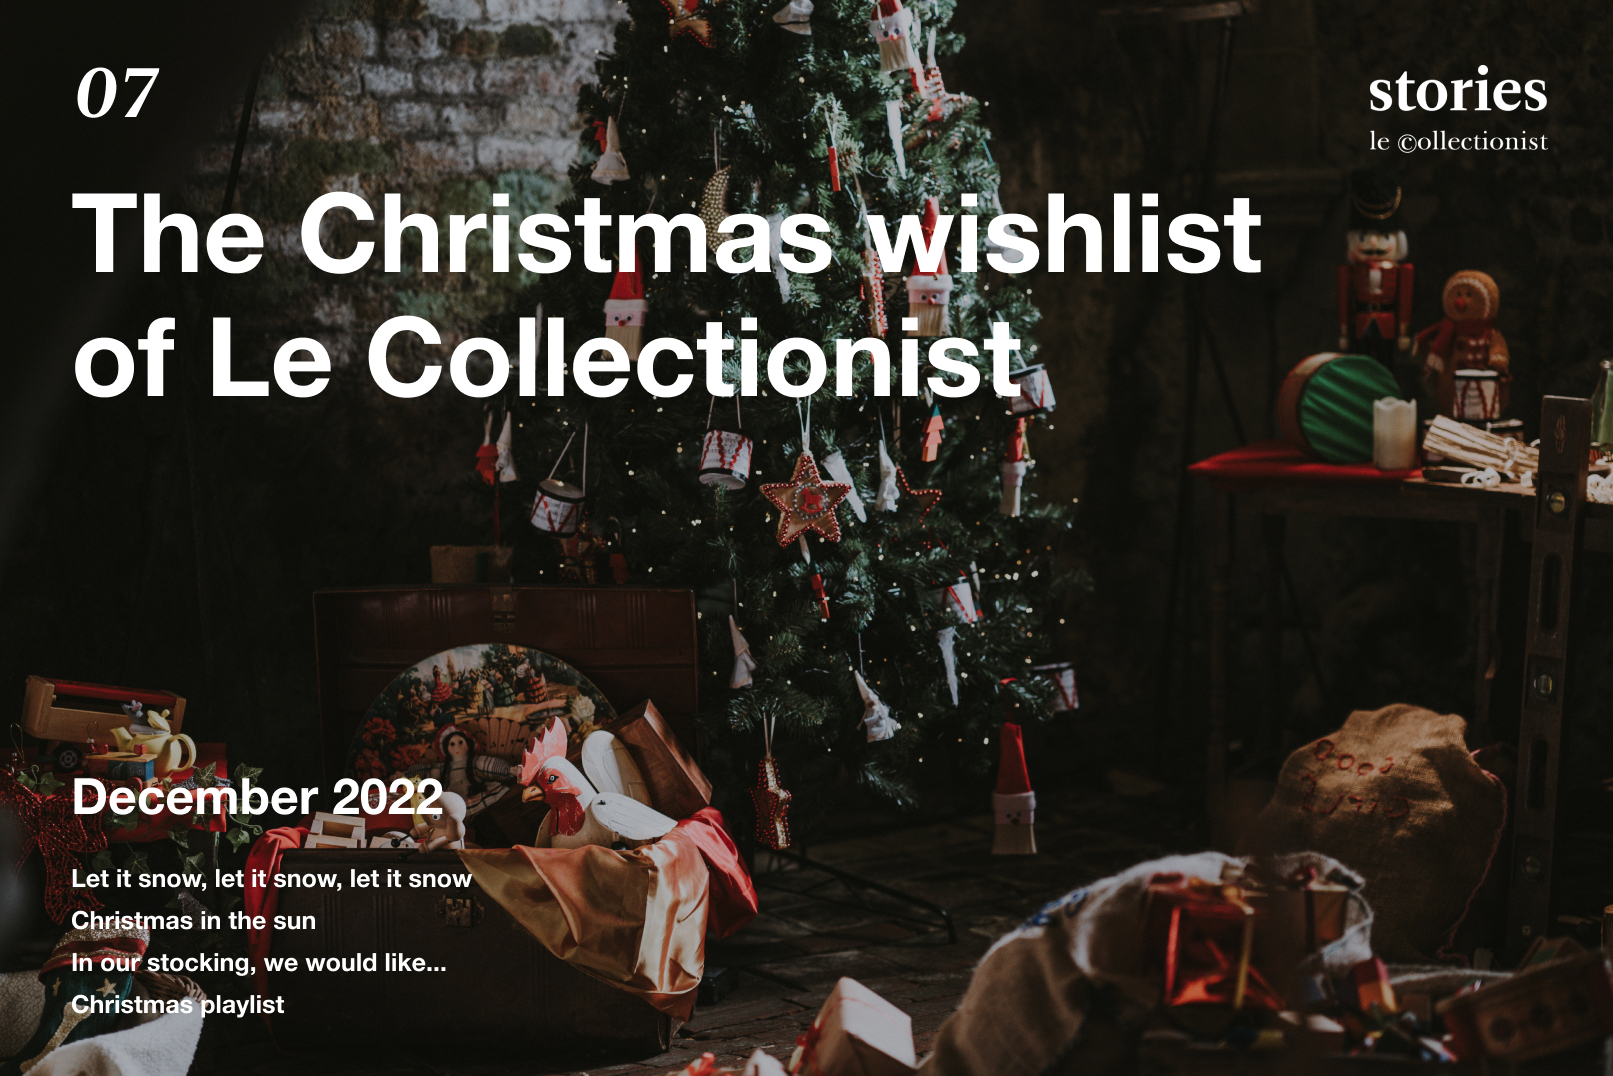 The December Issue: Le Collectionist's List to Santa